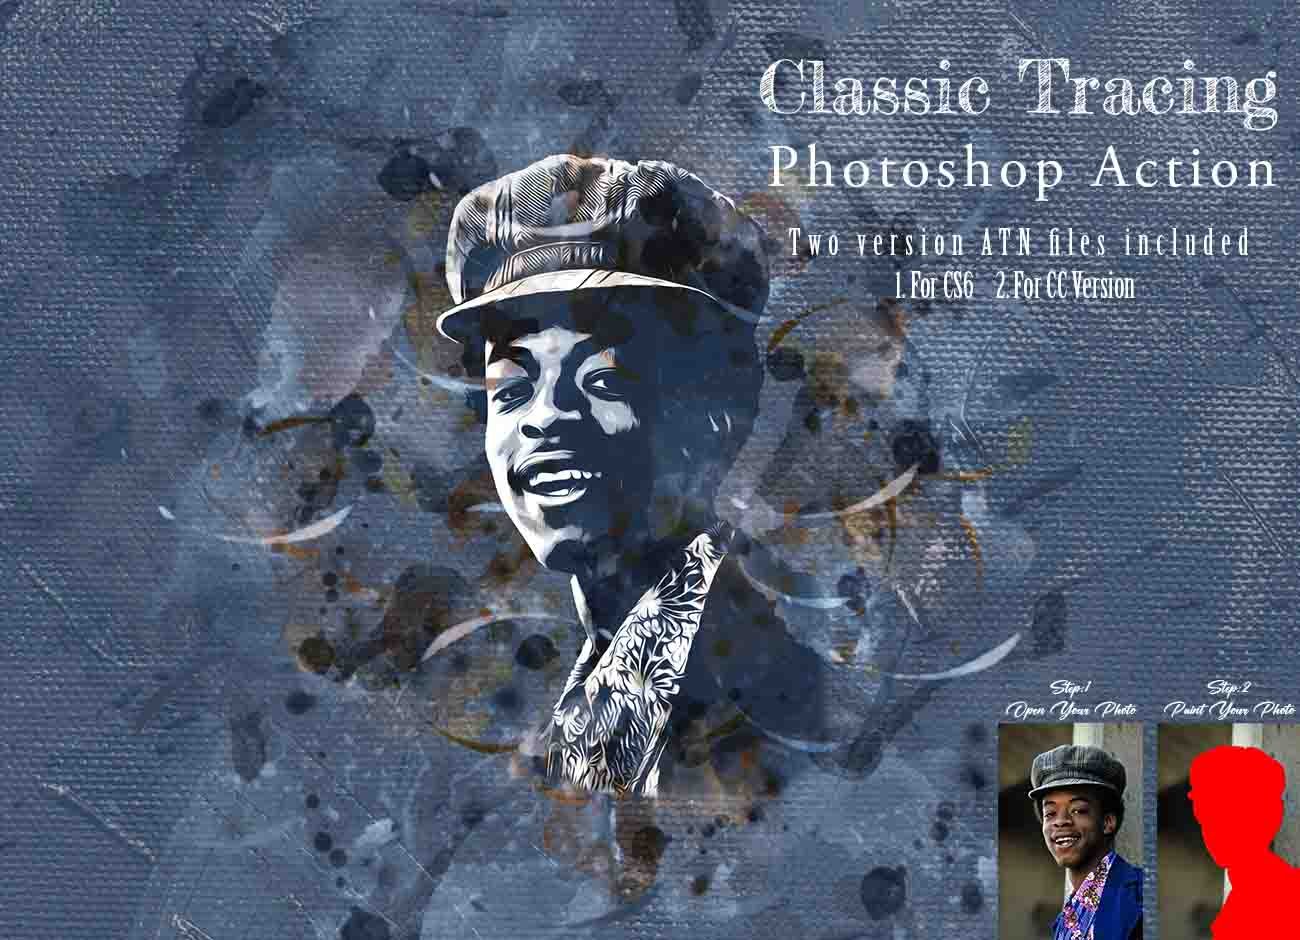 Classic Tracing Photoshop Actioncover image.